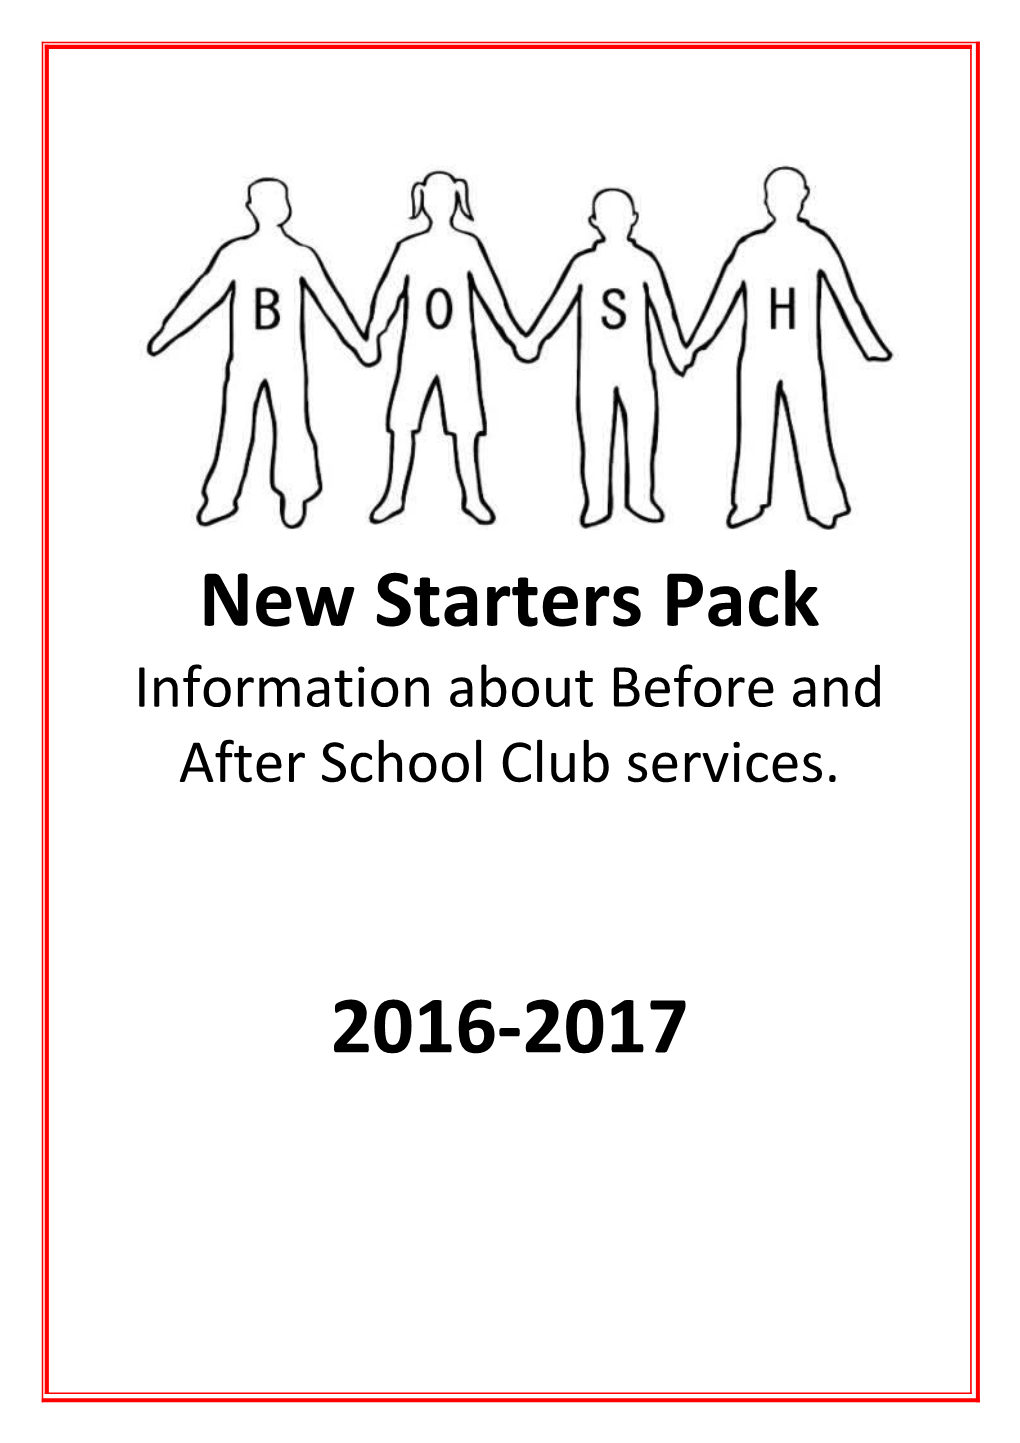 Information About Before and After School Club Services